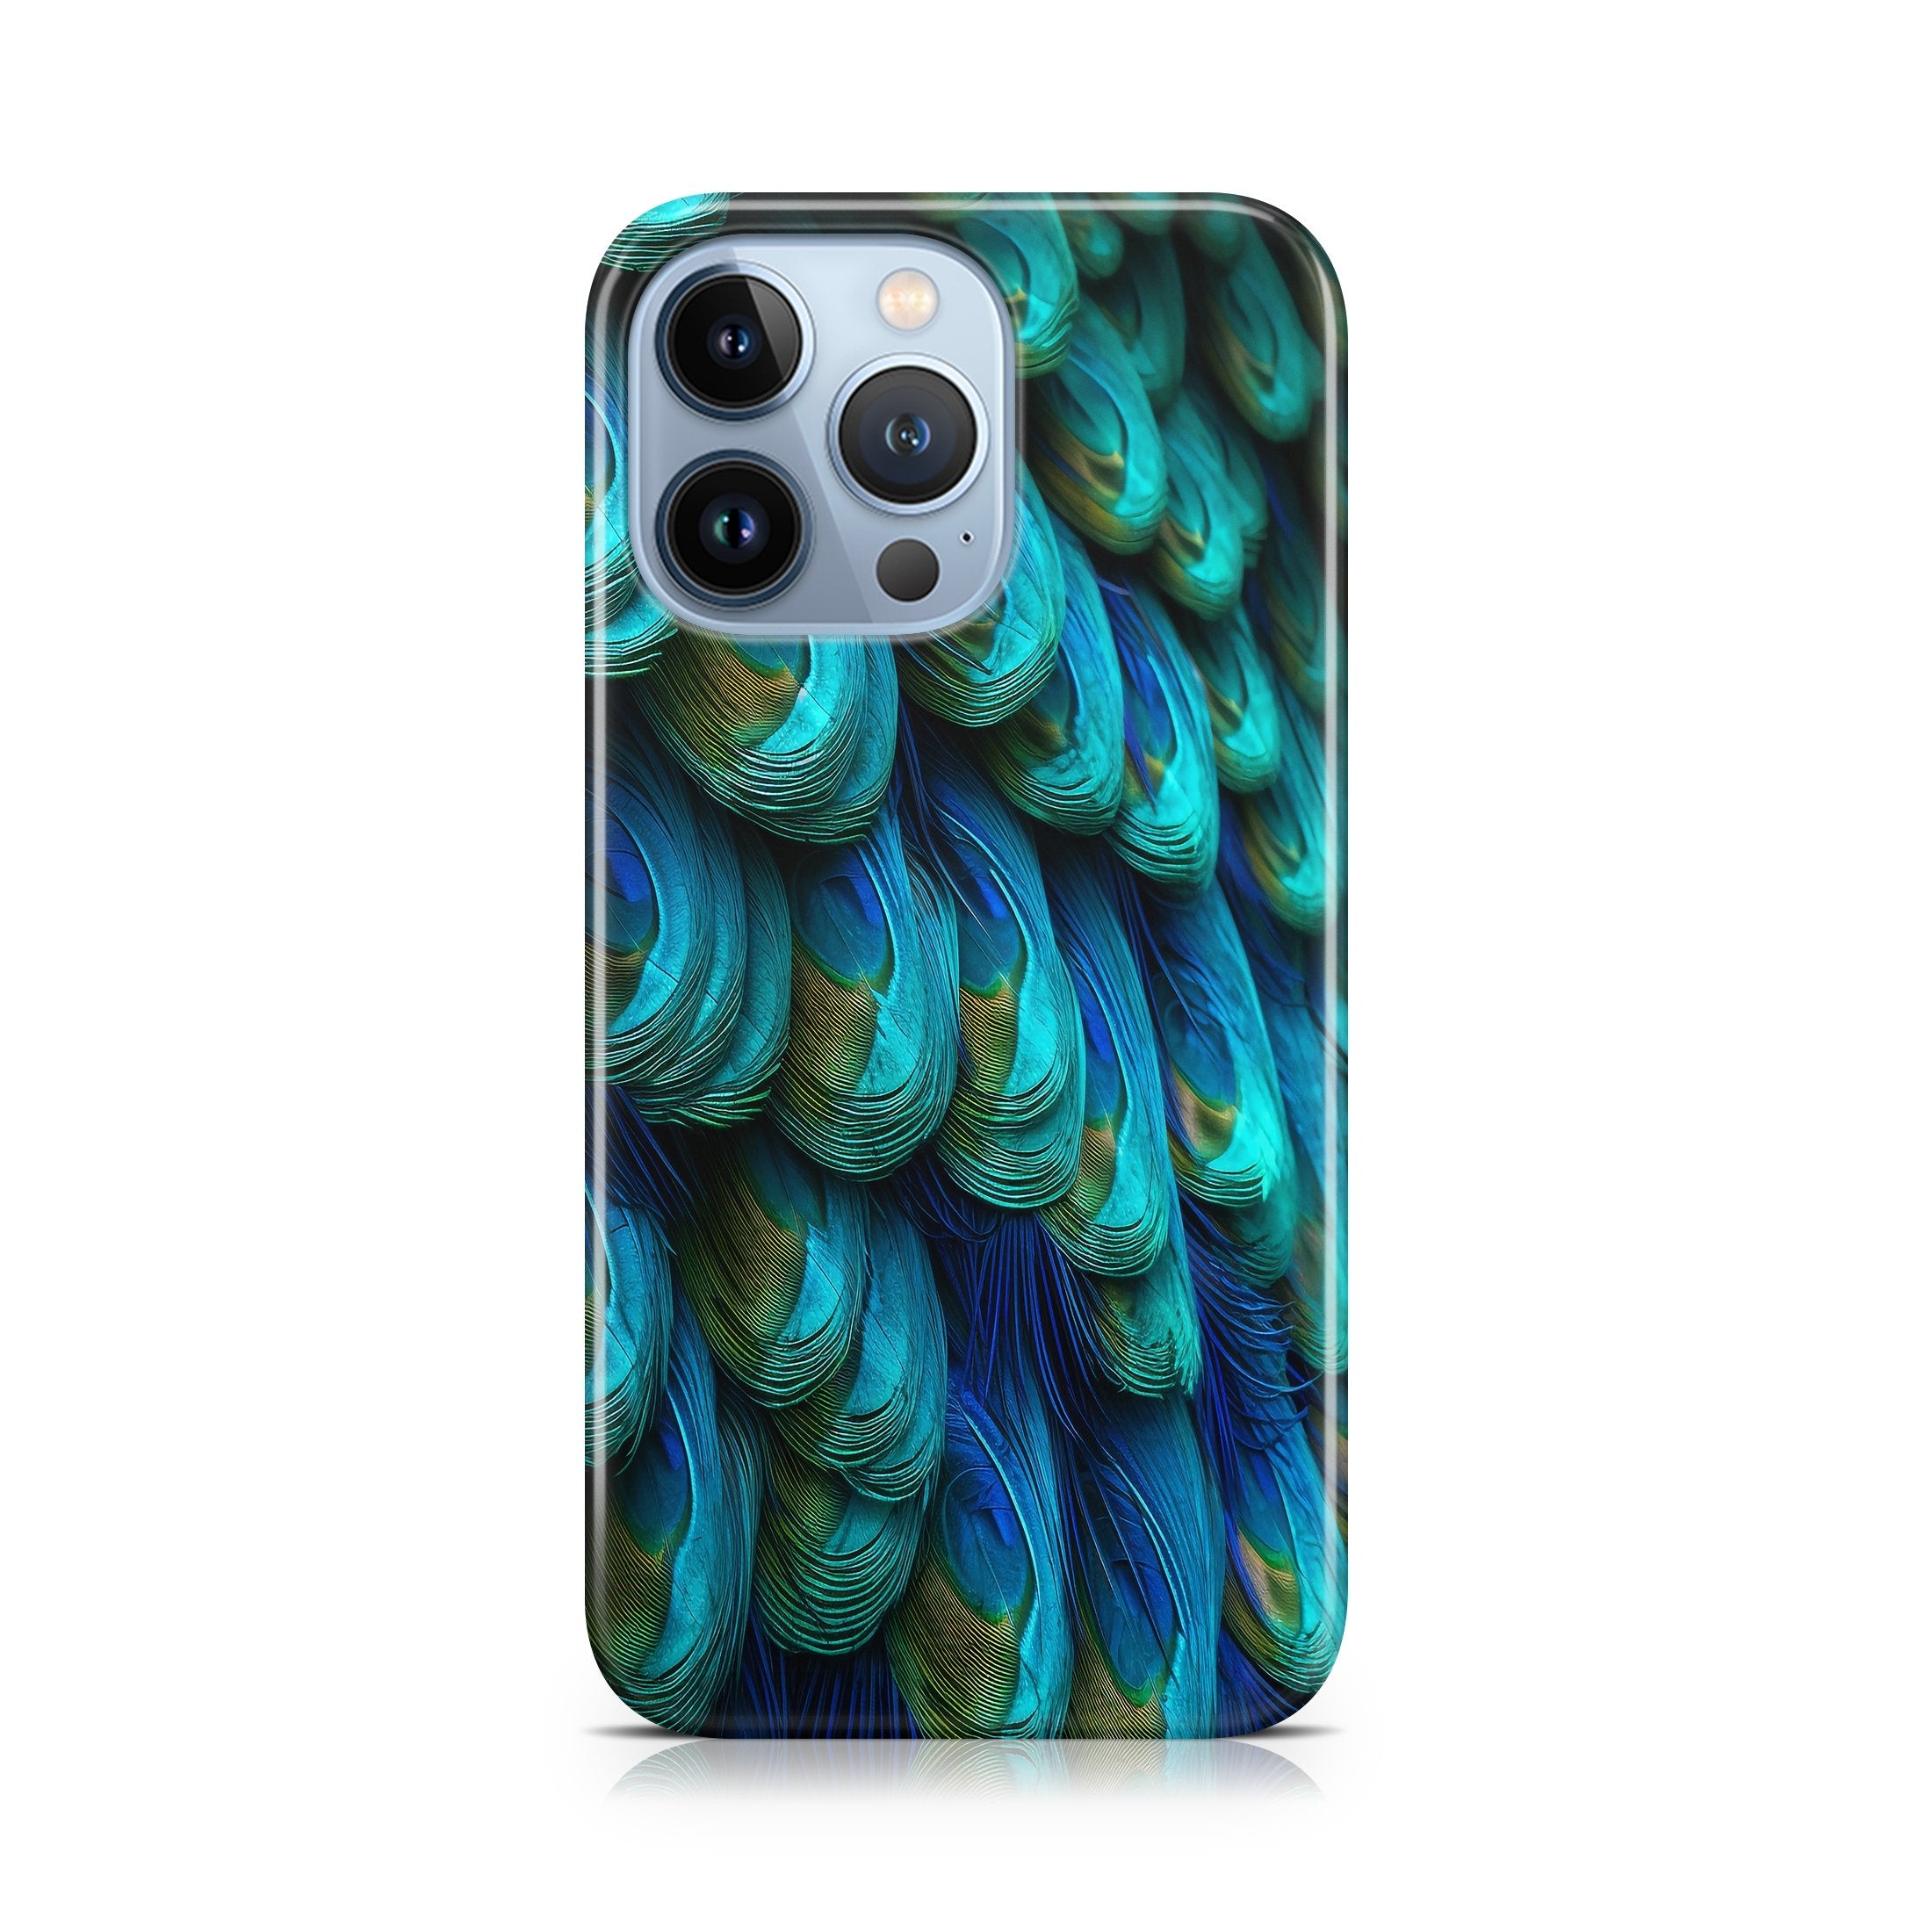 Specter Blue Dragonscale - iPhone phone case designs by CaseSwagger